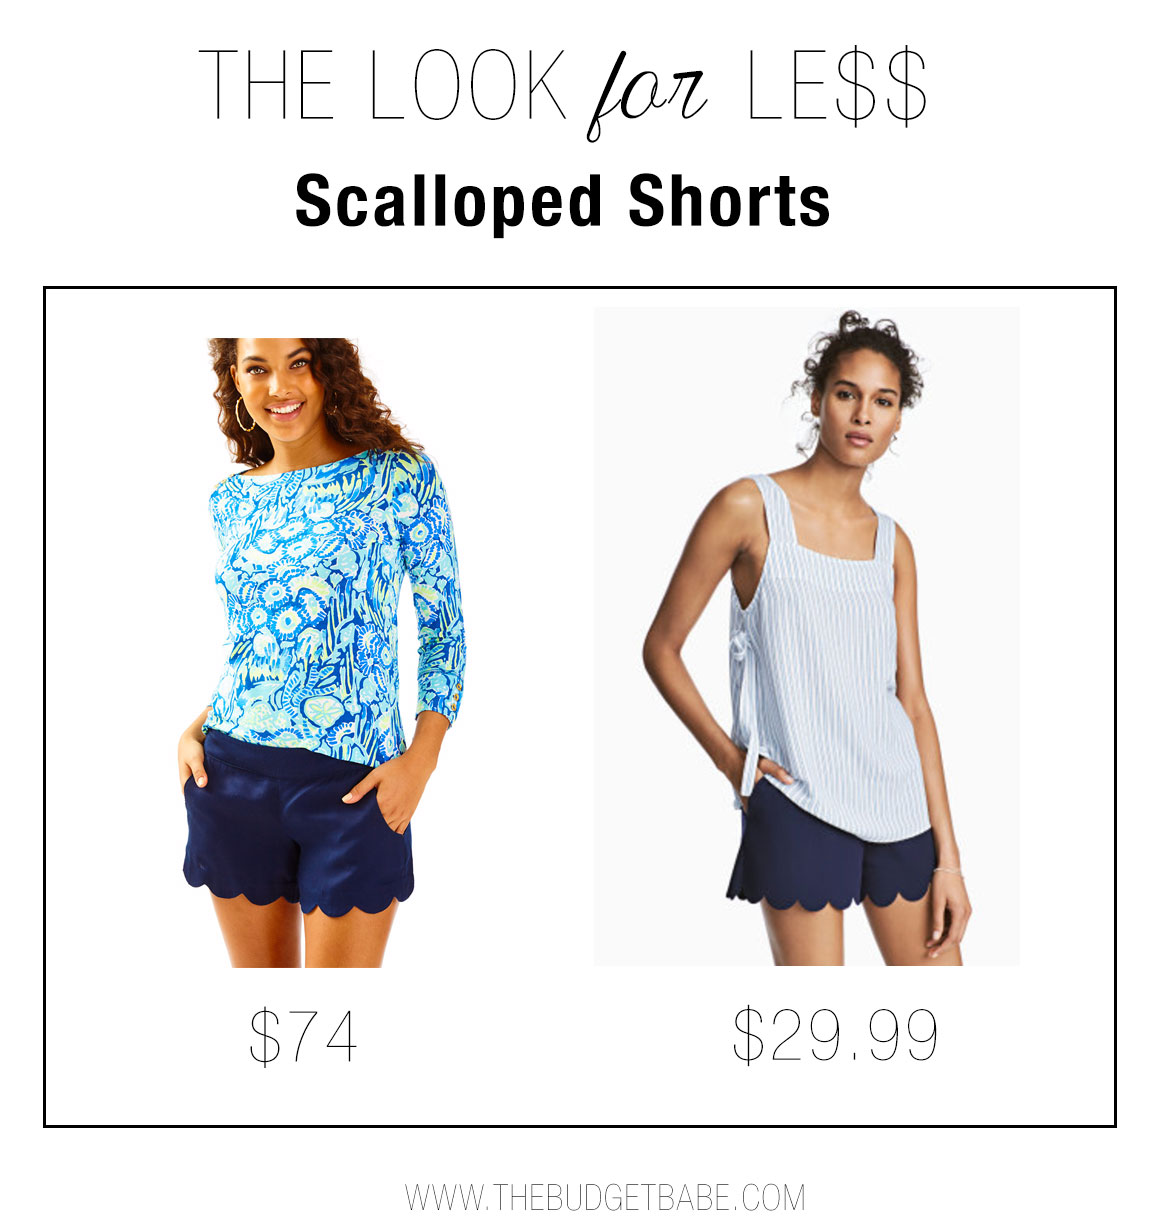 Try scalloped shorts this summer.